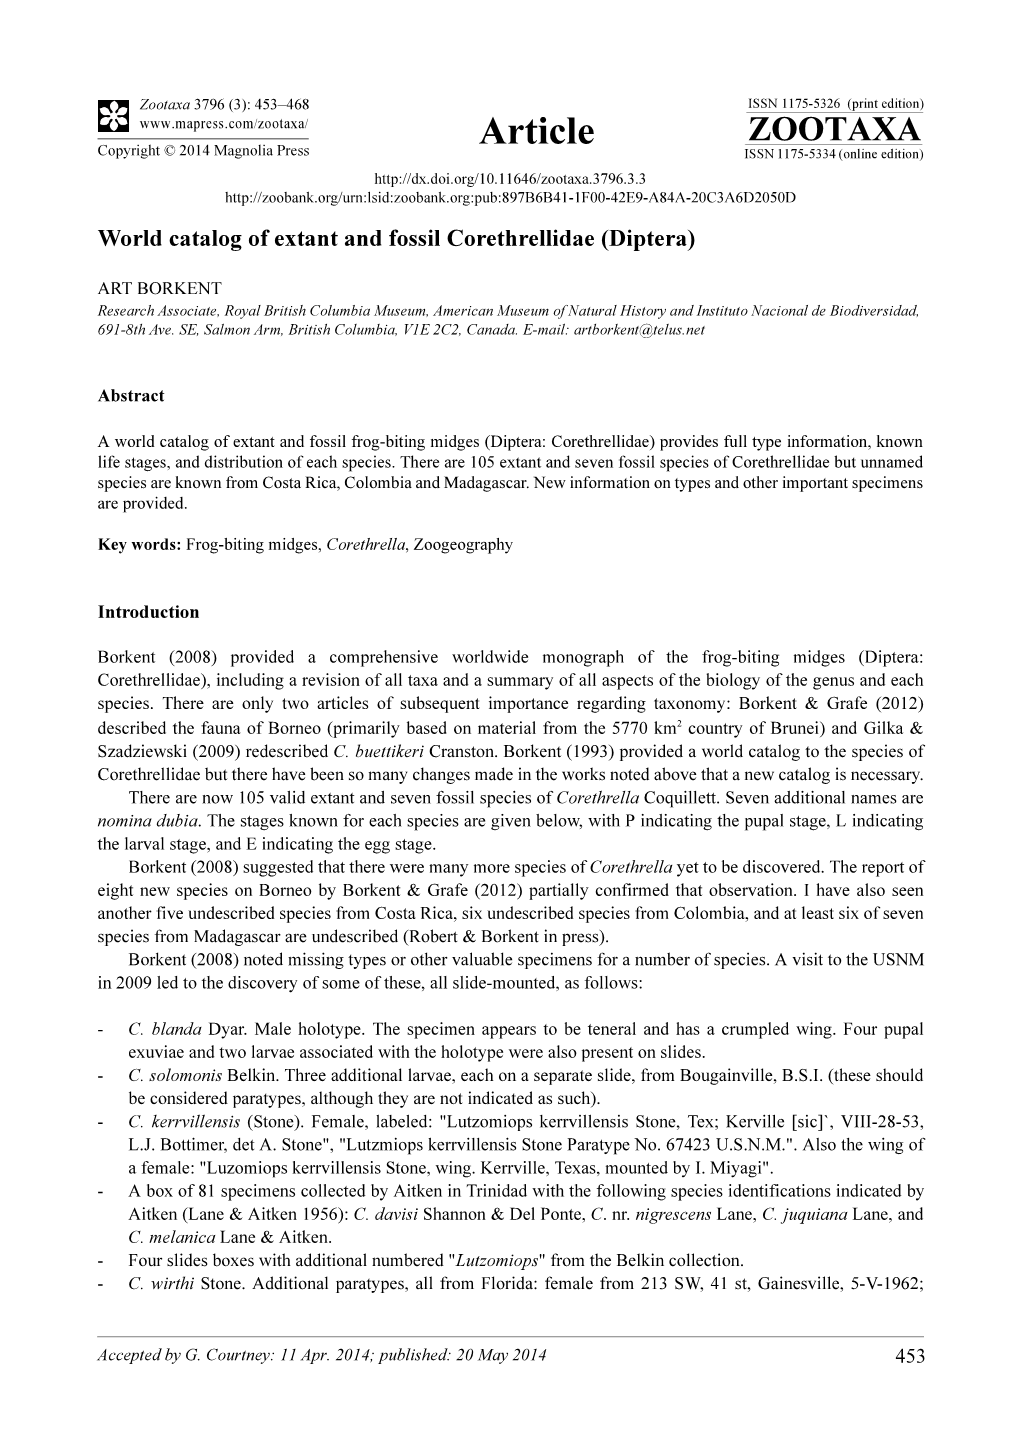 World Catalog of Extant and Fossil Corethrellidae (Diptera)